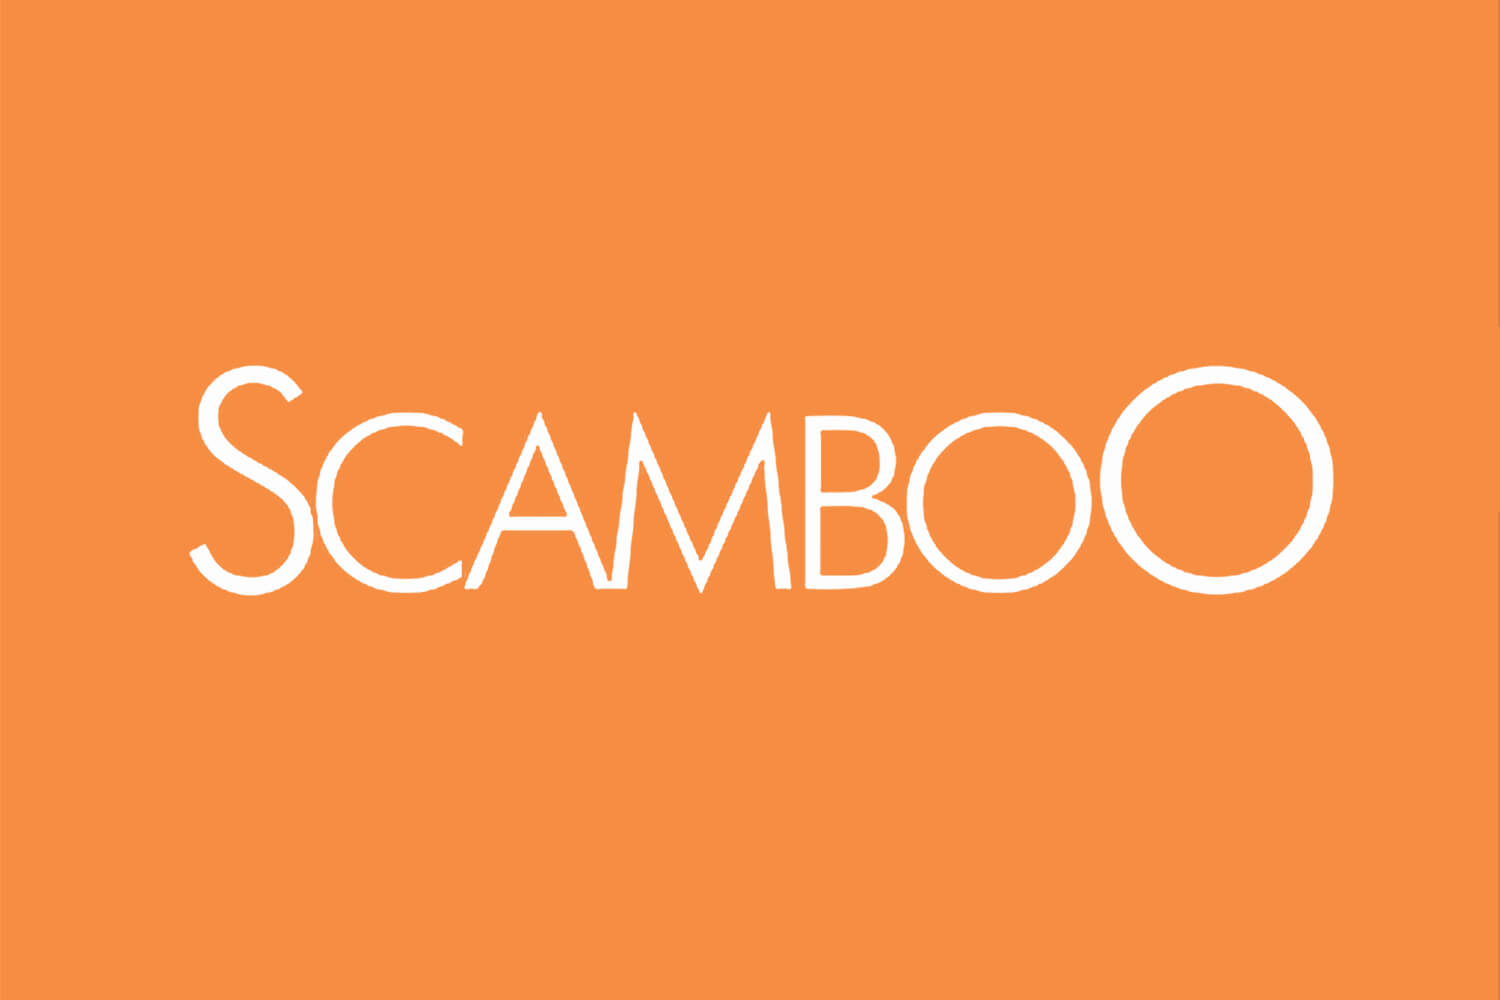 Scamboo